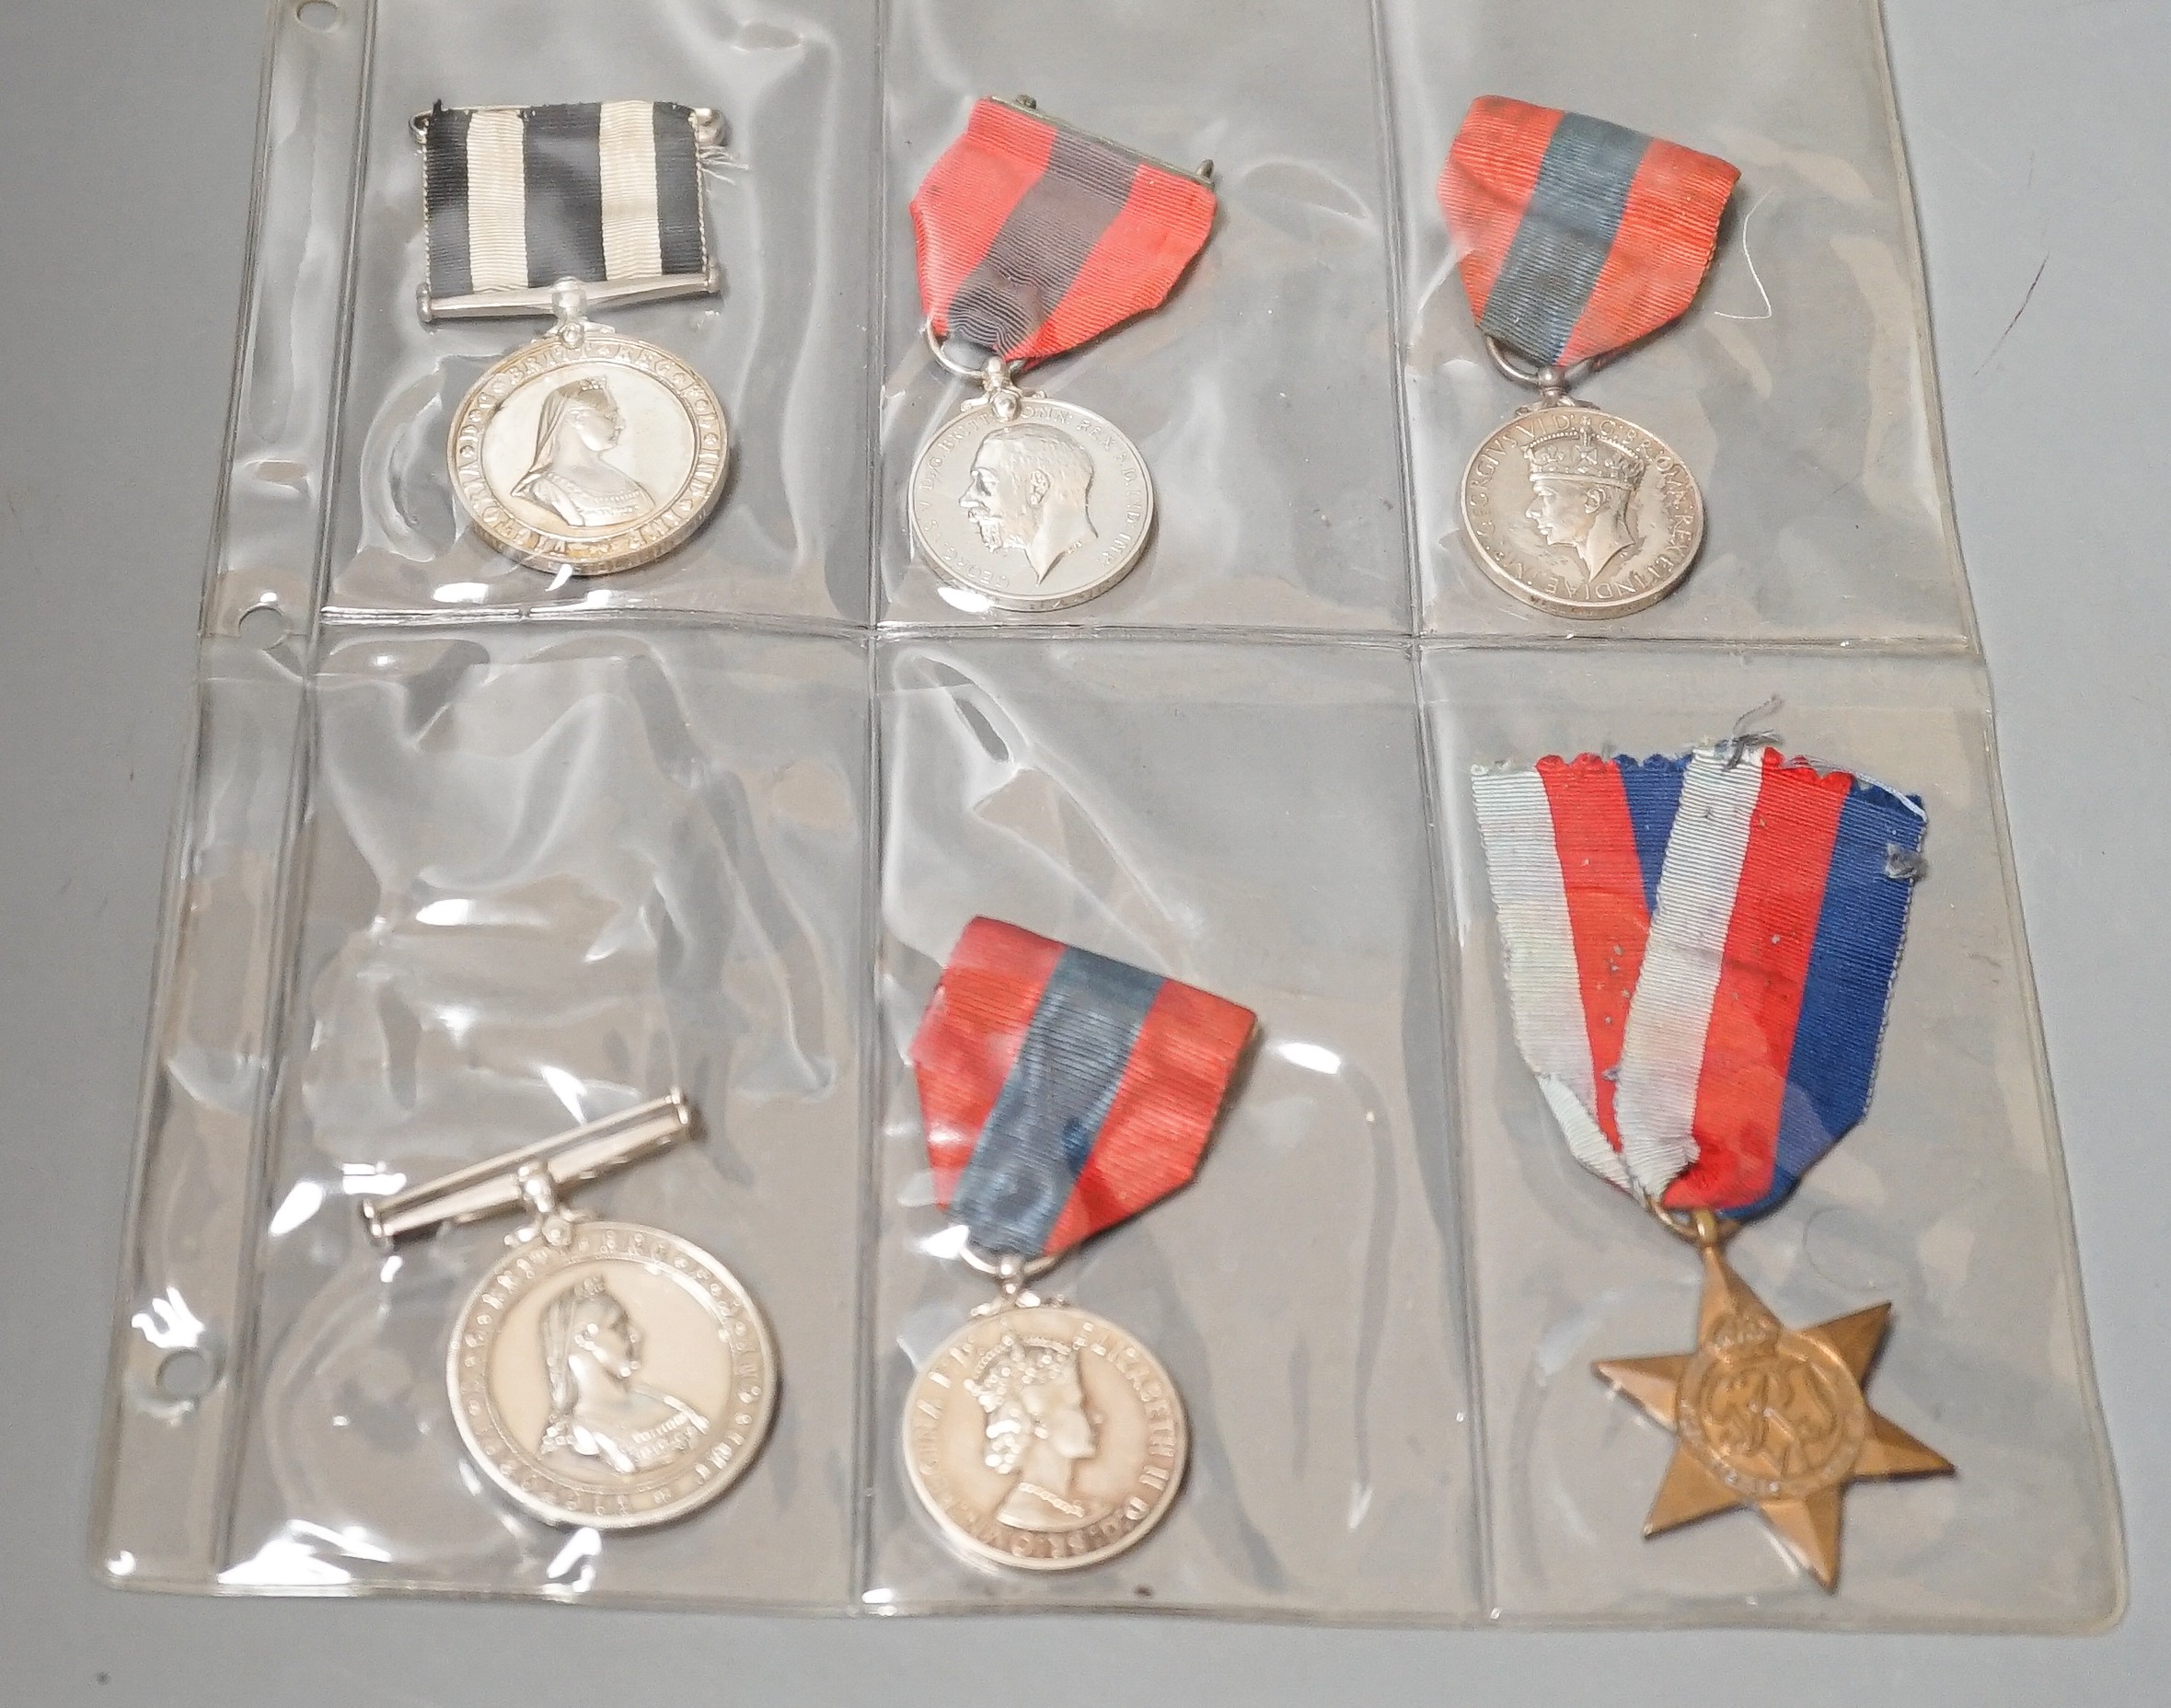 Three Imperial Service medals to Edward James Parker, William Horsfield and Albert Edward Ellis and two Service medals of the Order of St John to 13472 A/SIS.M.TIDMAN.BRISTOL.NO.1.NSG.DIV.NO.2DIS.JAB. 1935 and E692 SGT.